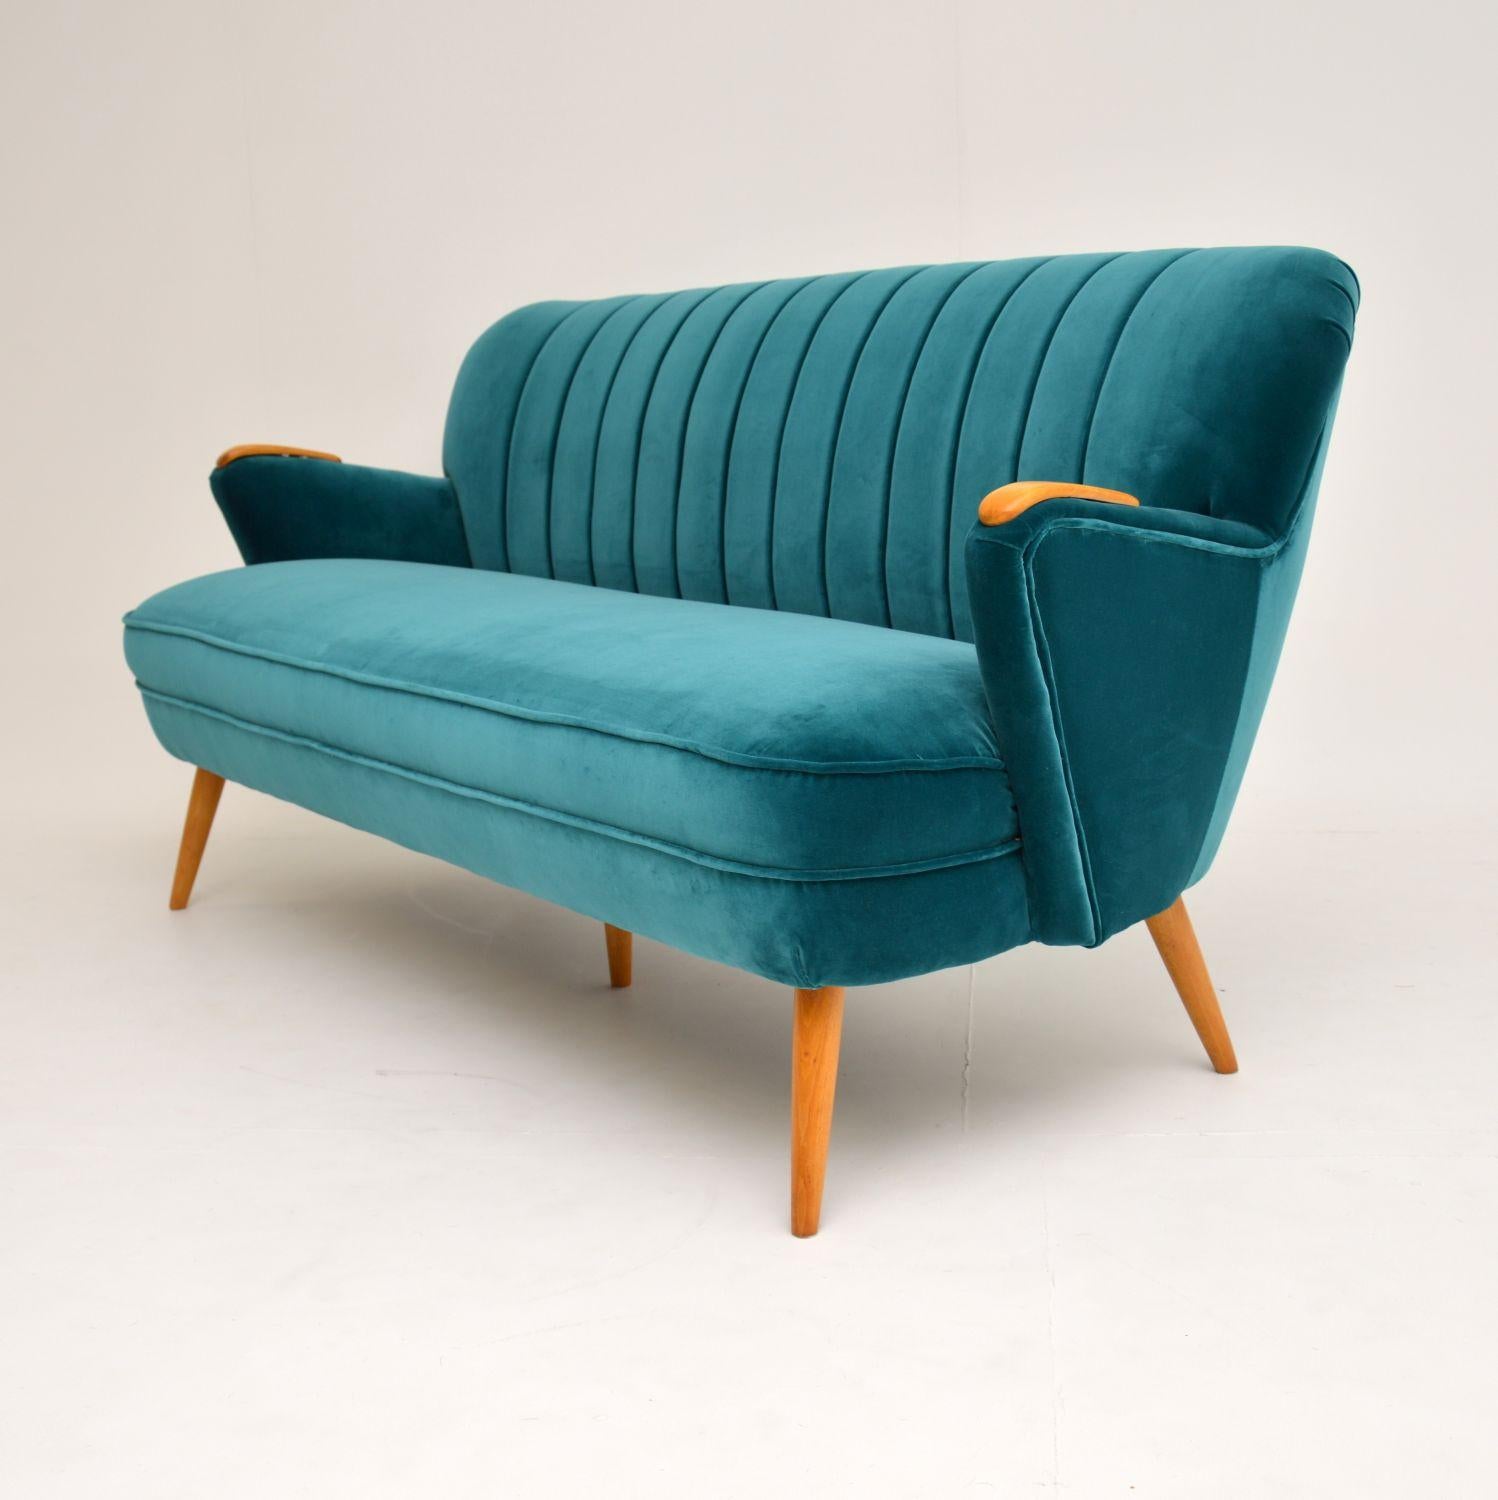 An absolutely stunning vintage cocktail sofa of the highest quality. This dates from the 1960s, it was made in Germany. We have had this completely restored, it is in perfect condition. We have had this re-upholstered in our lovely light green /